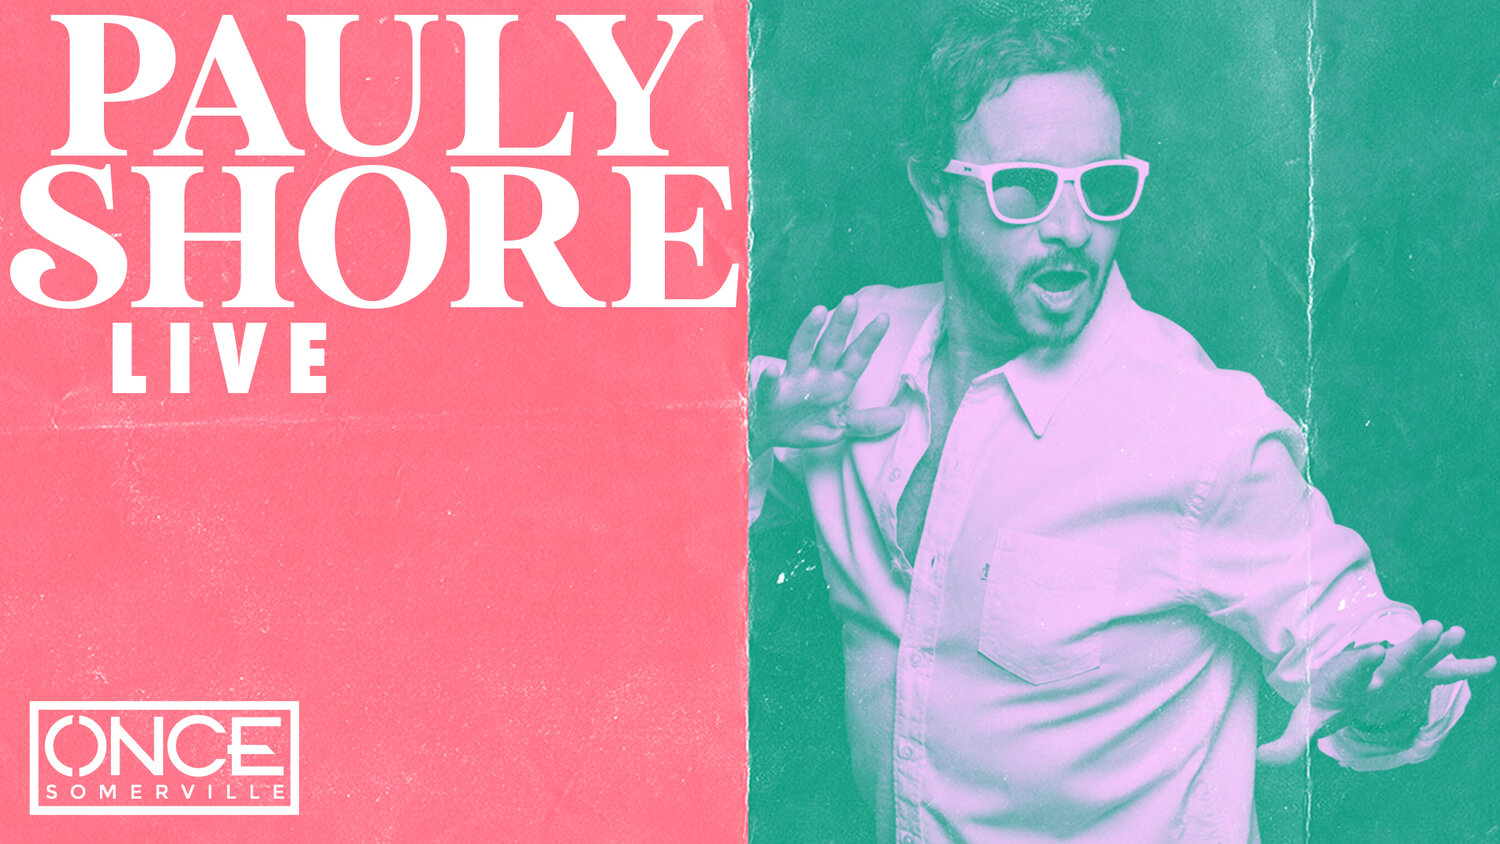 Pauly Shore at ONCE Ballroom in Somerville/Boston - Buy Tickets — League Podcast